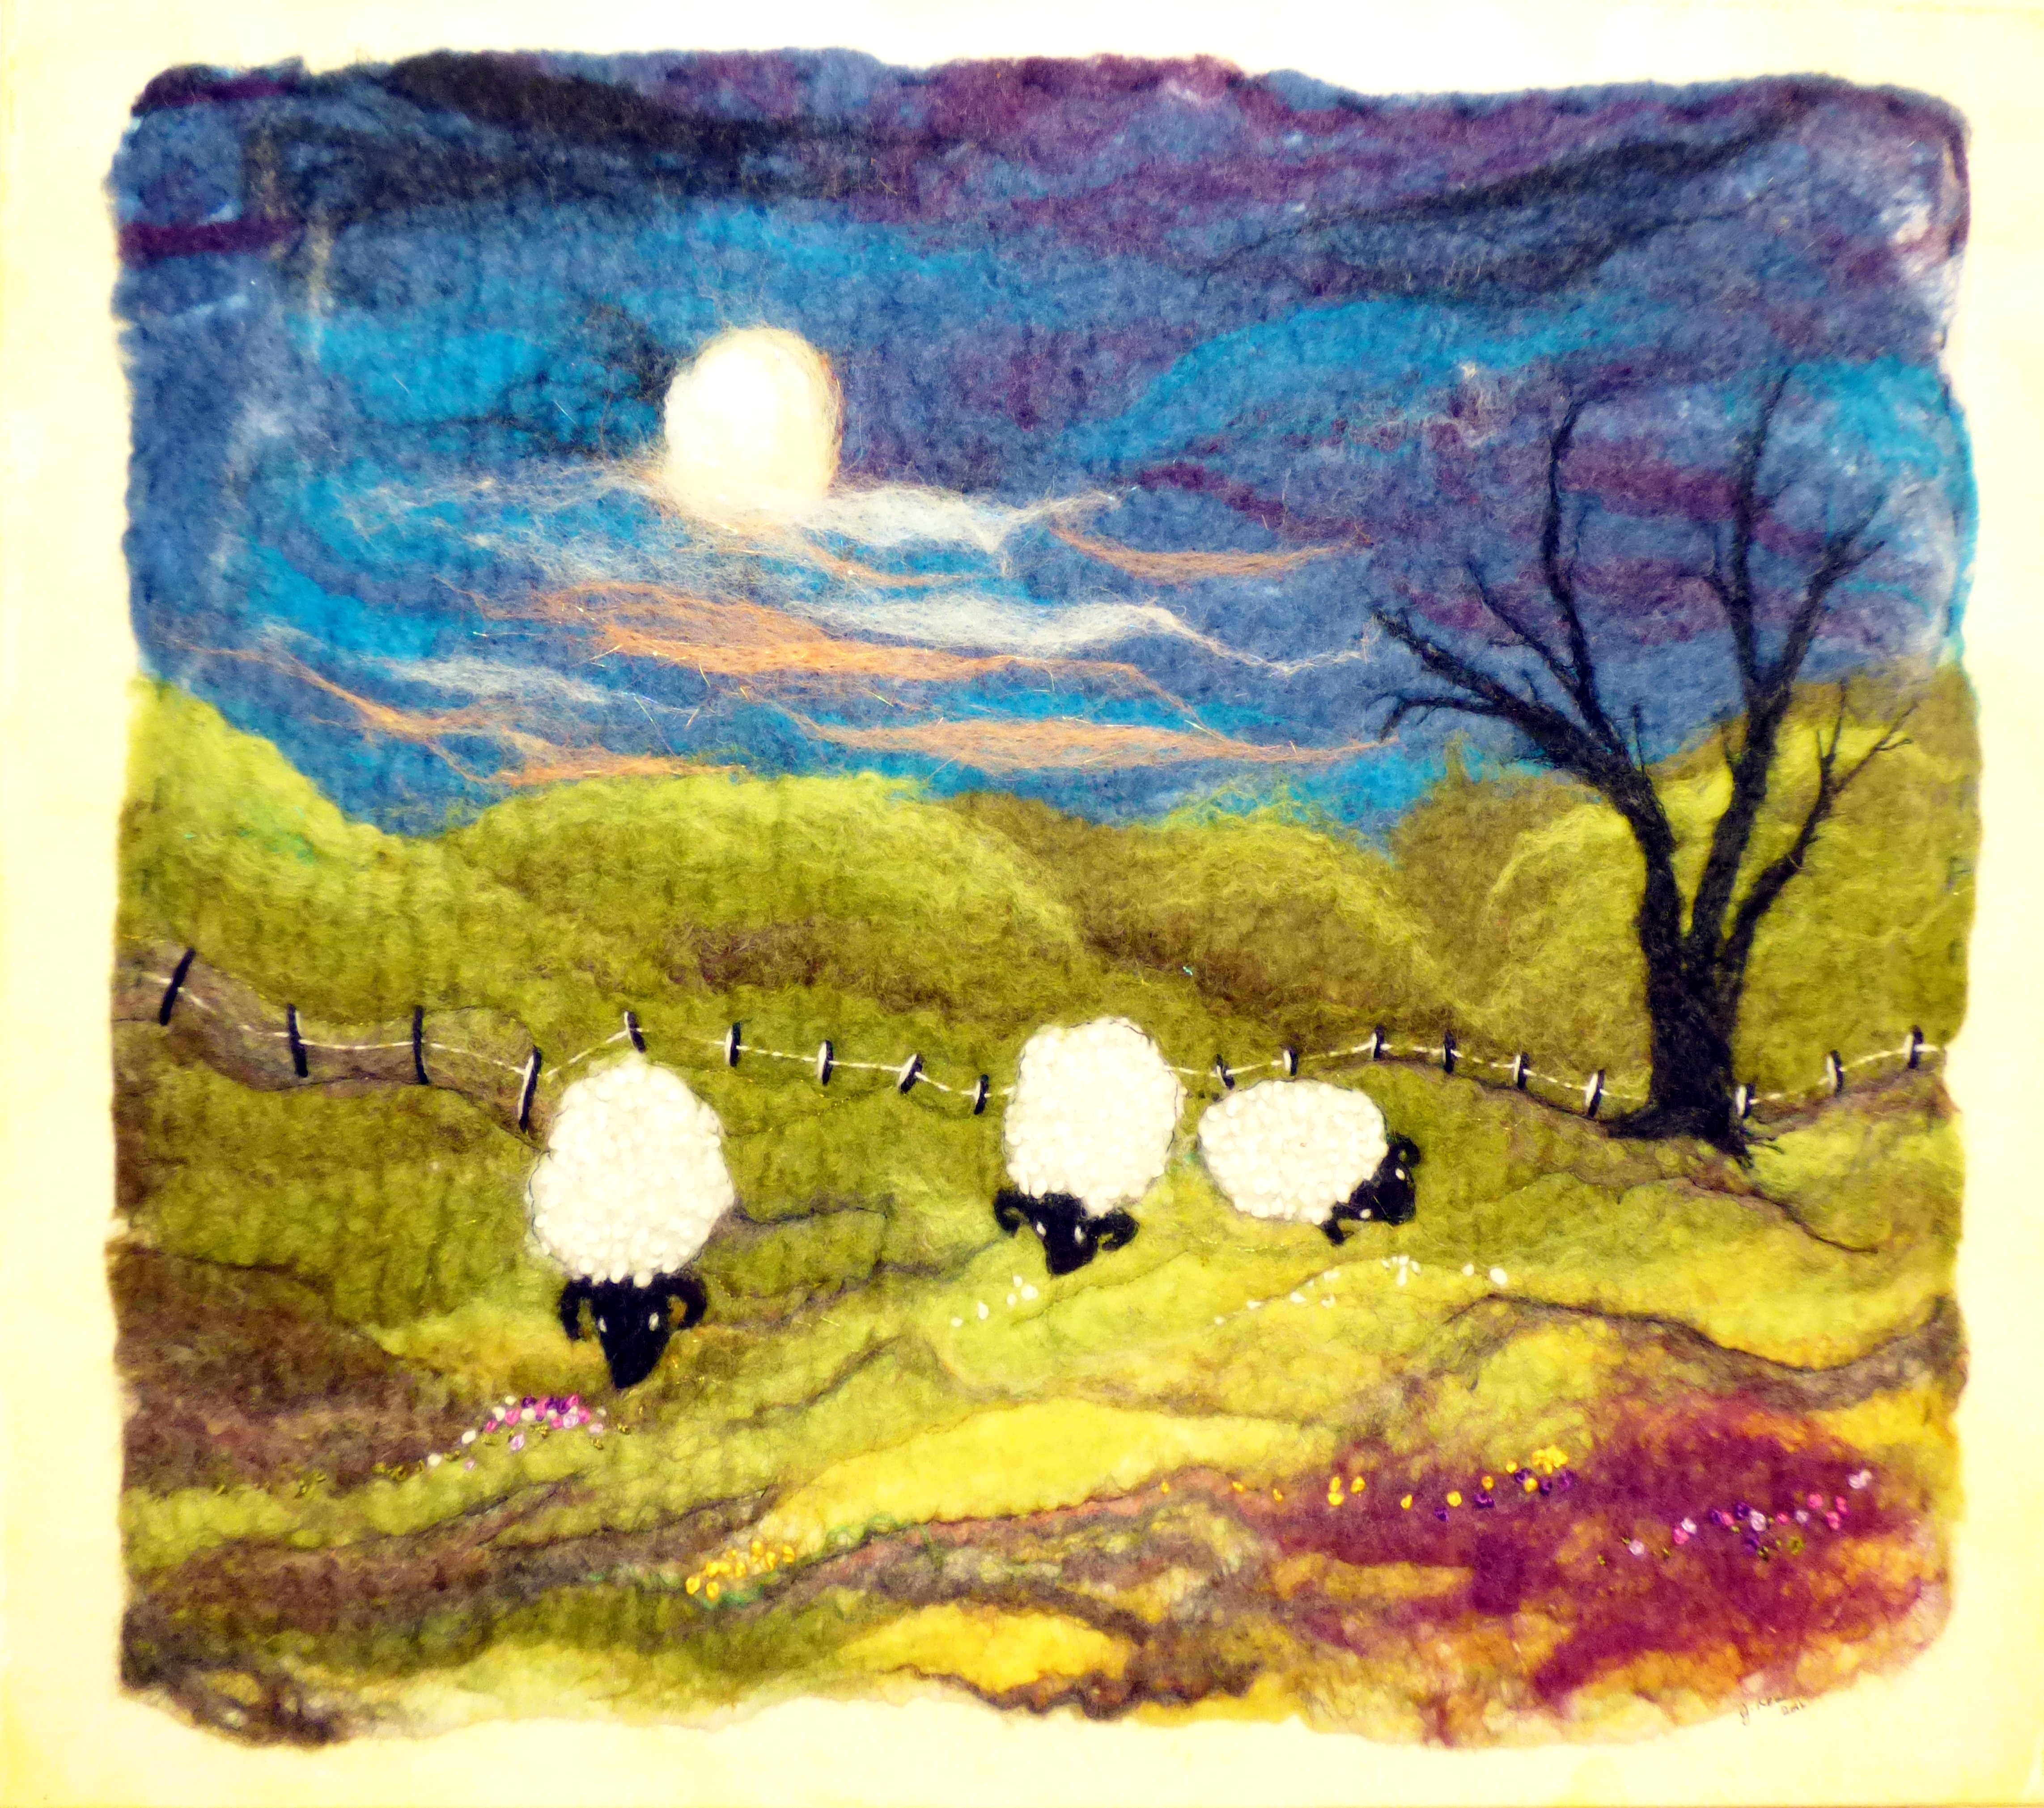 MOONLIGHT GRAZING by Janet Lewis, wet & needle felting, hand and machine embroidery